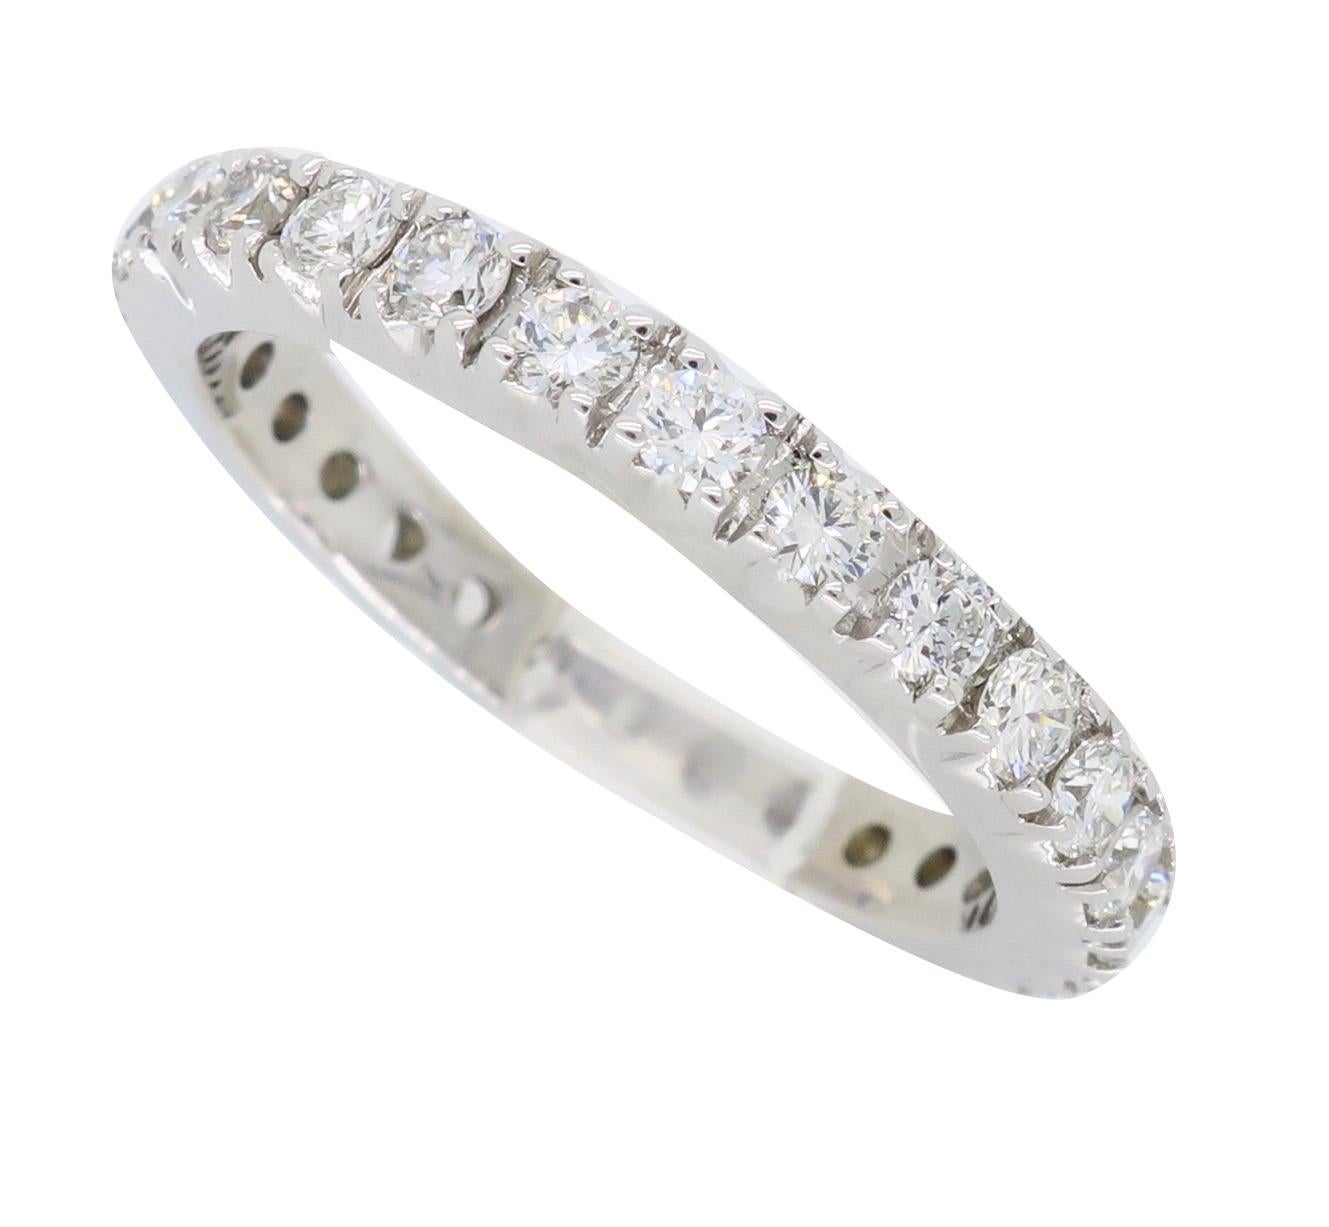 Classic round brilliant cut eternity style diamond band.

Diamond Carat Weight: Approximately .87CTW
Diamond Cut: Round Brilliant Cut Diamonds
Color: Average  G-I
Clarity: Average VS-SI
Metal: 14K White Gold
Marked/Tested: Stamped “14K